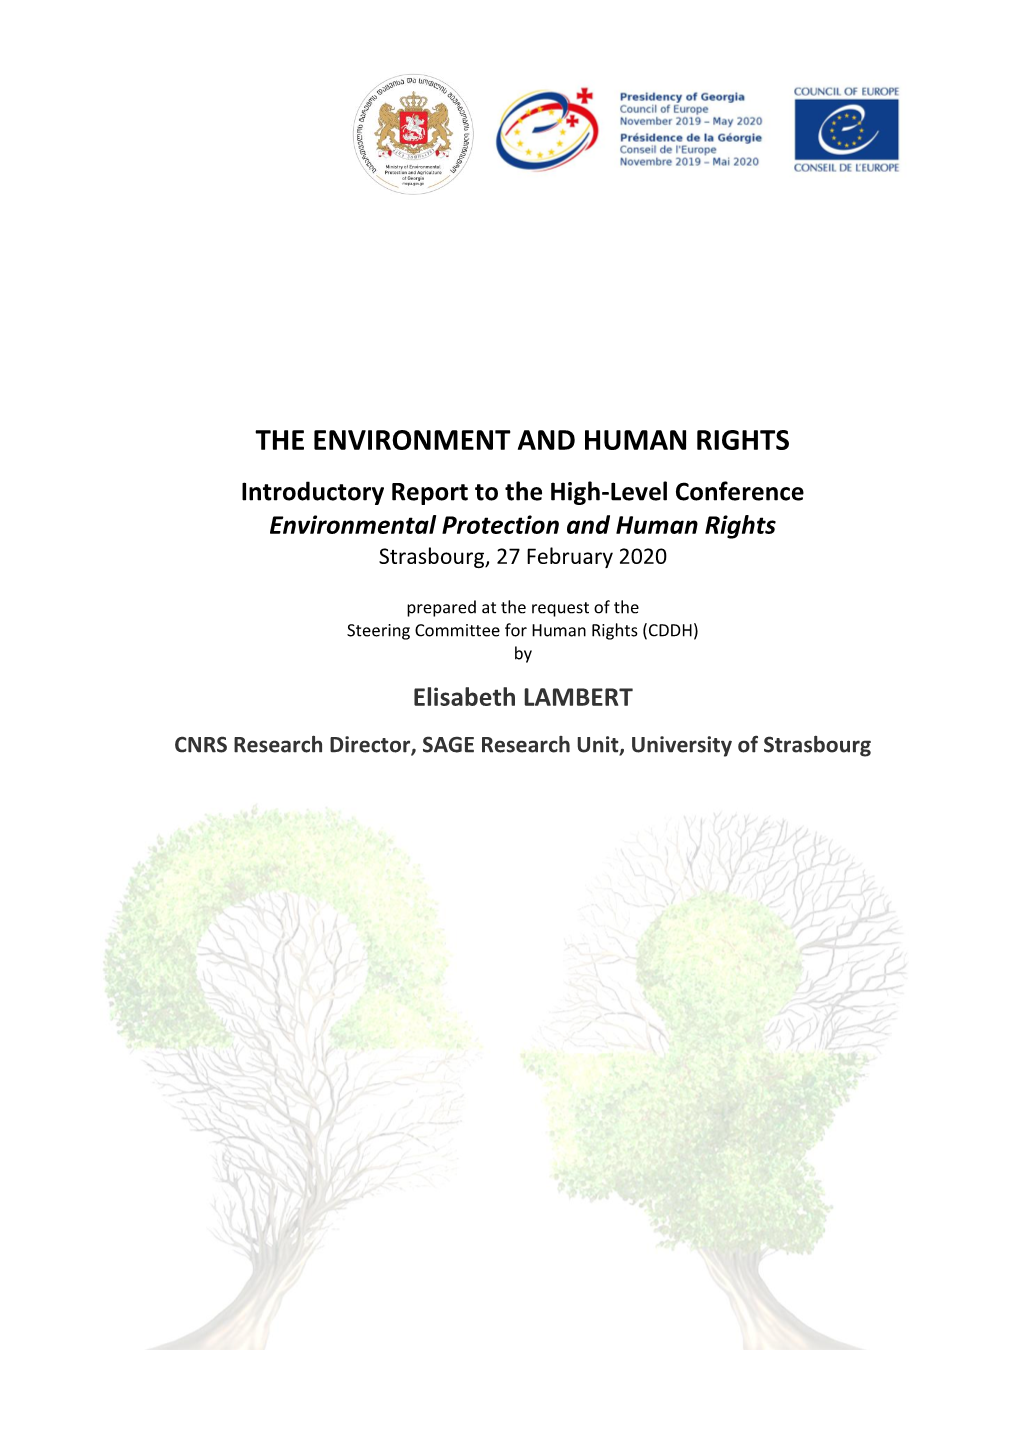 The Environment and Human Rights: Introductory Report to the High-Level Conference Environmental Protection and Human